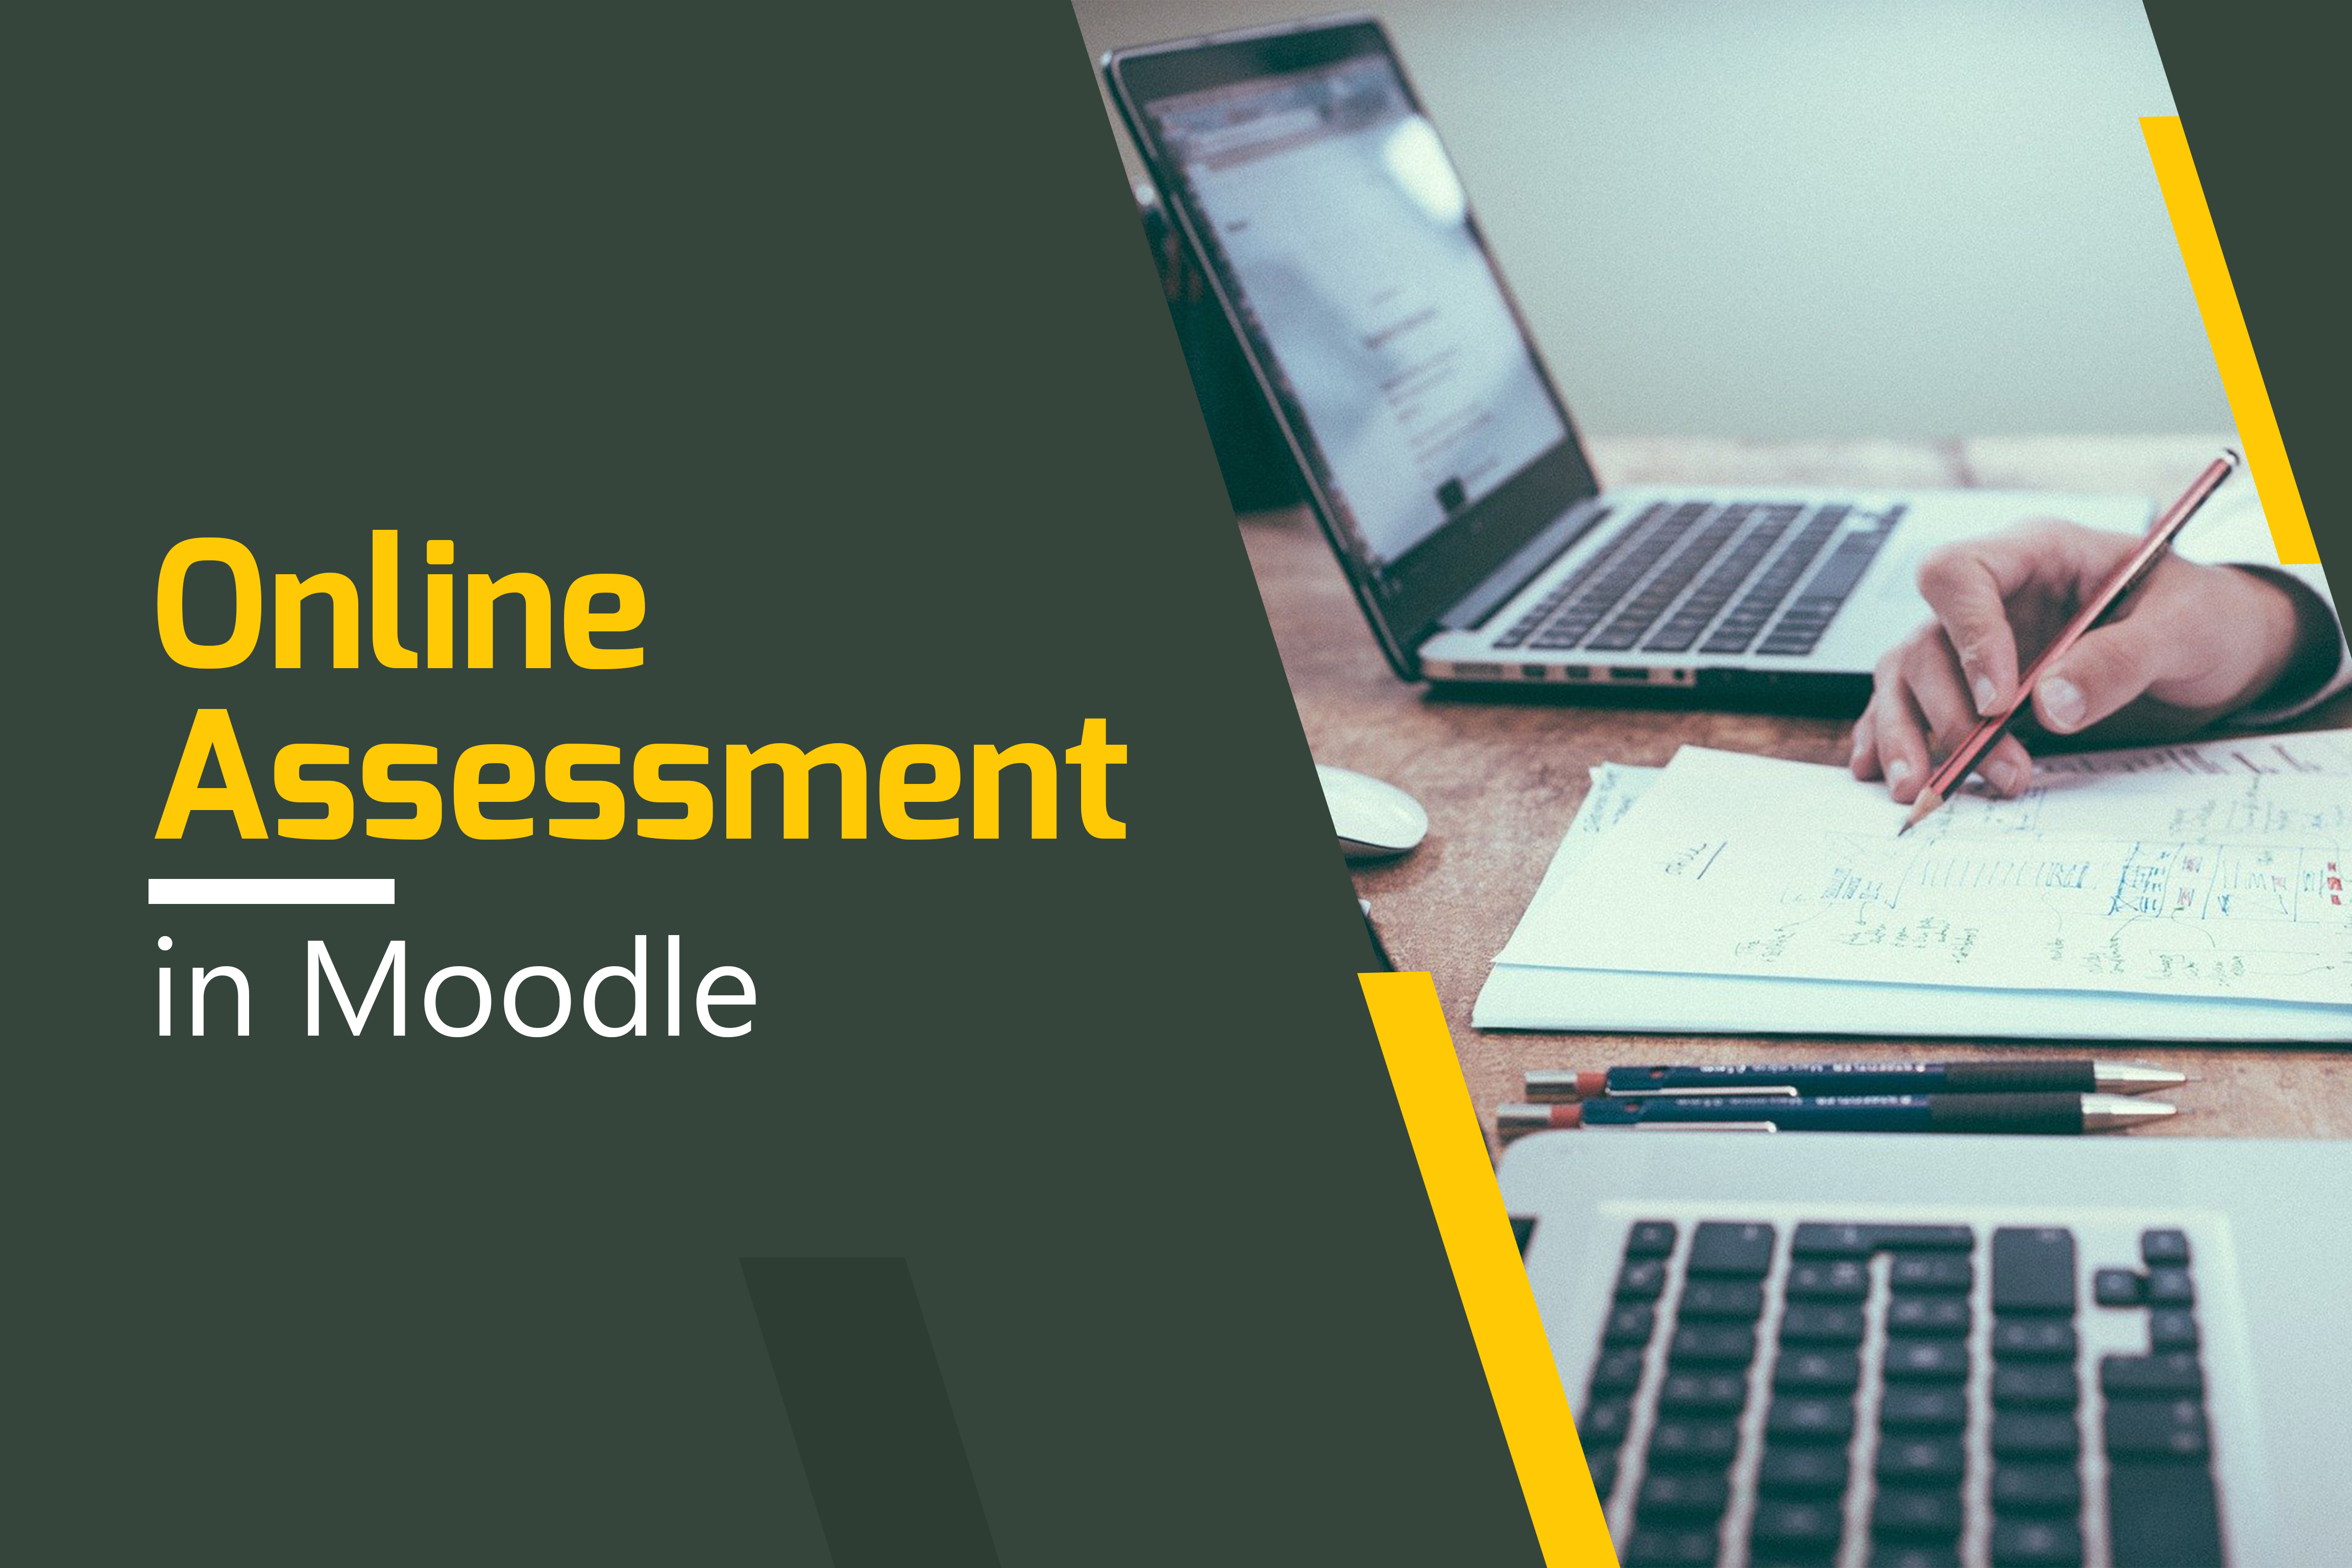 Online Assessment in Moodle